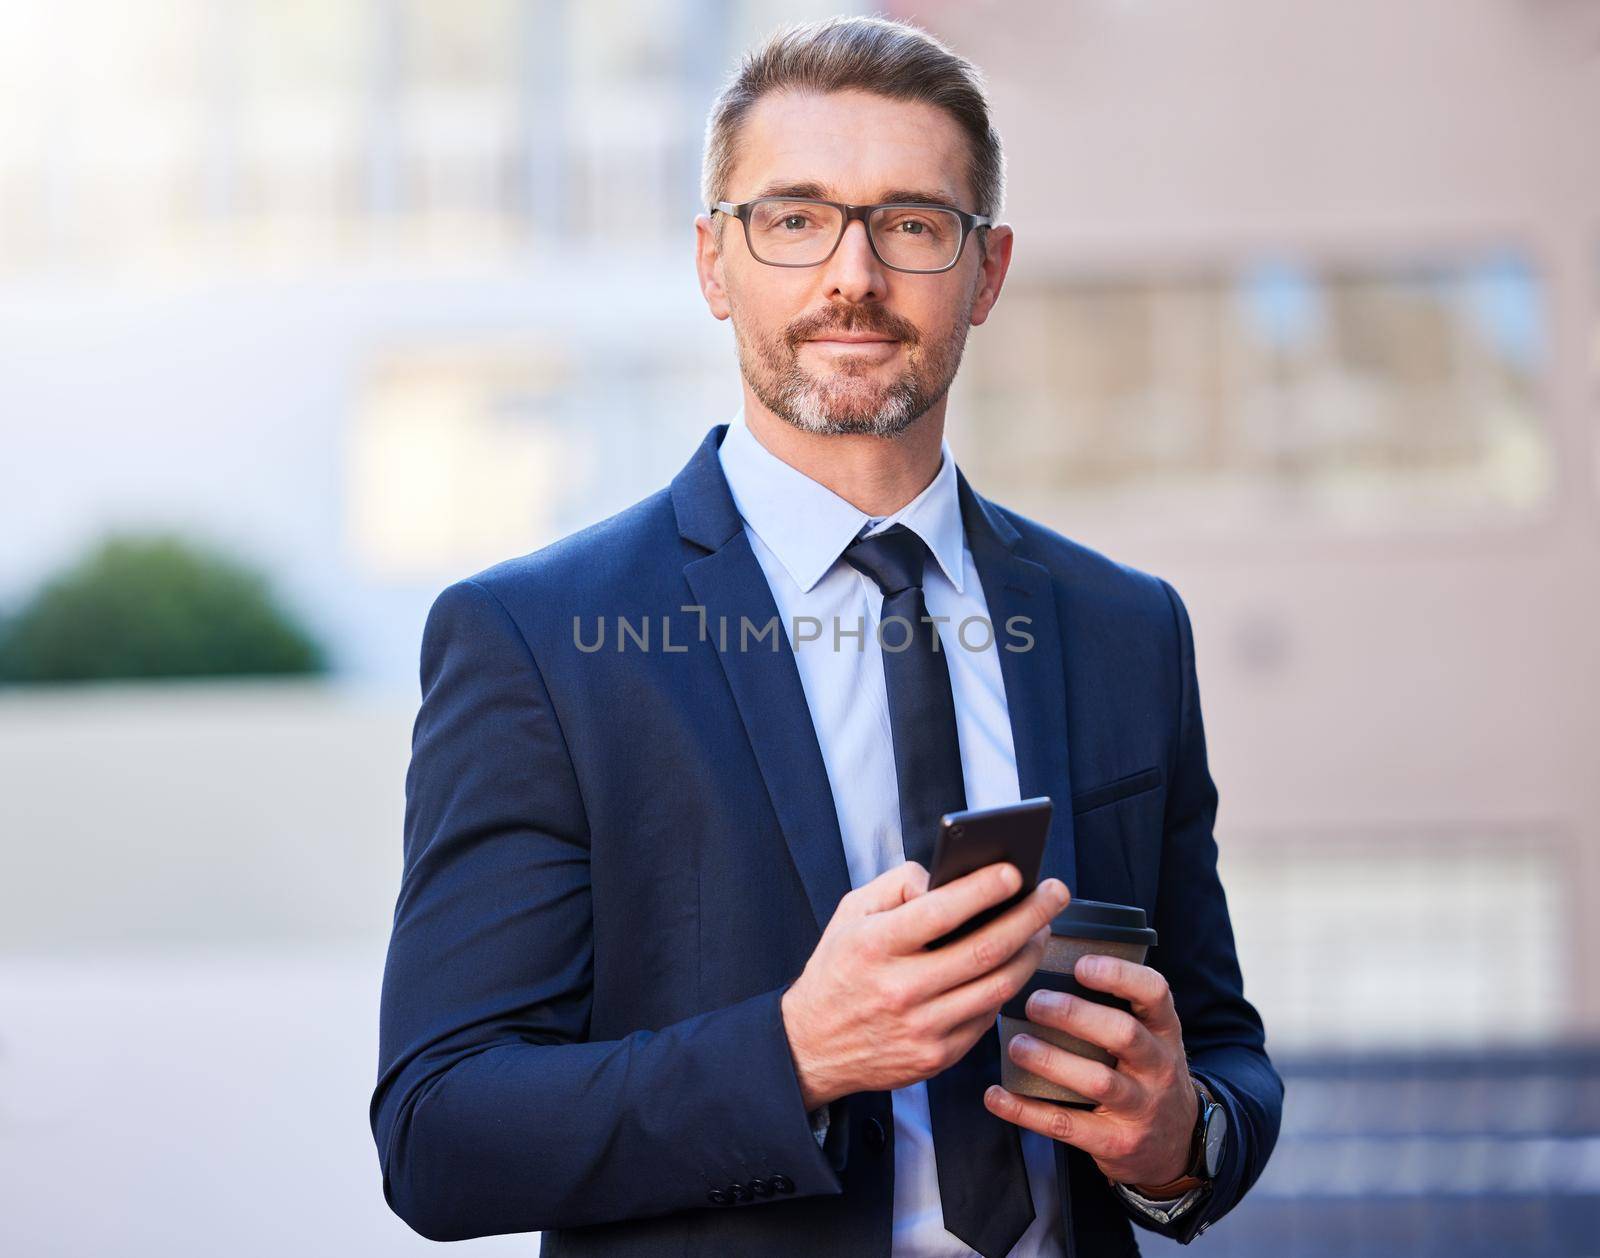 Communication keeps me ahead of the game. Cropped portrait of a handsome mature businessman standing outside in the city